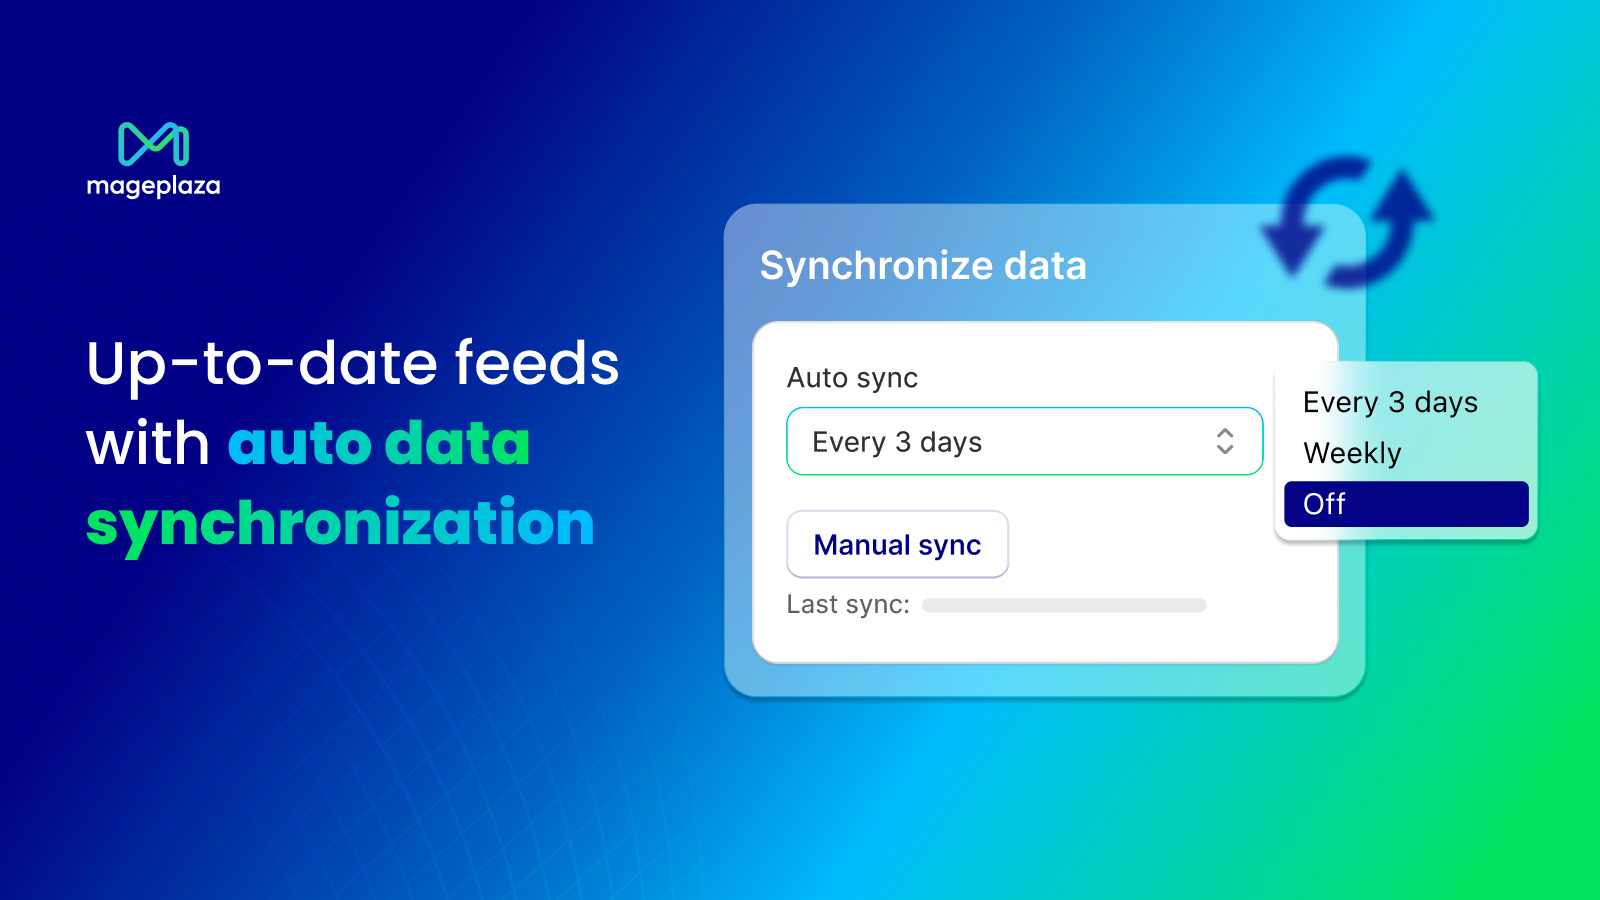 Up-to-date feeds with auto data synchronization